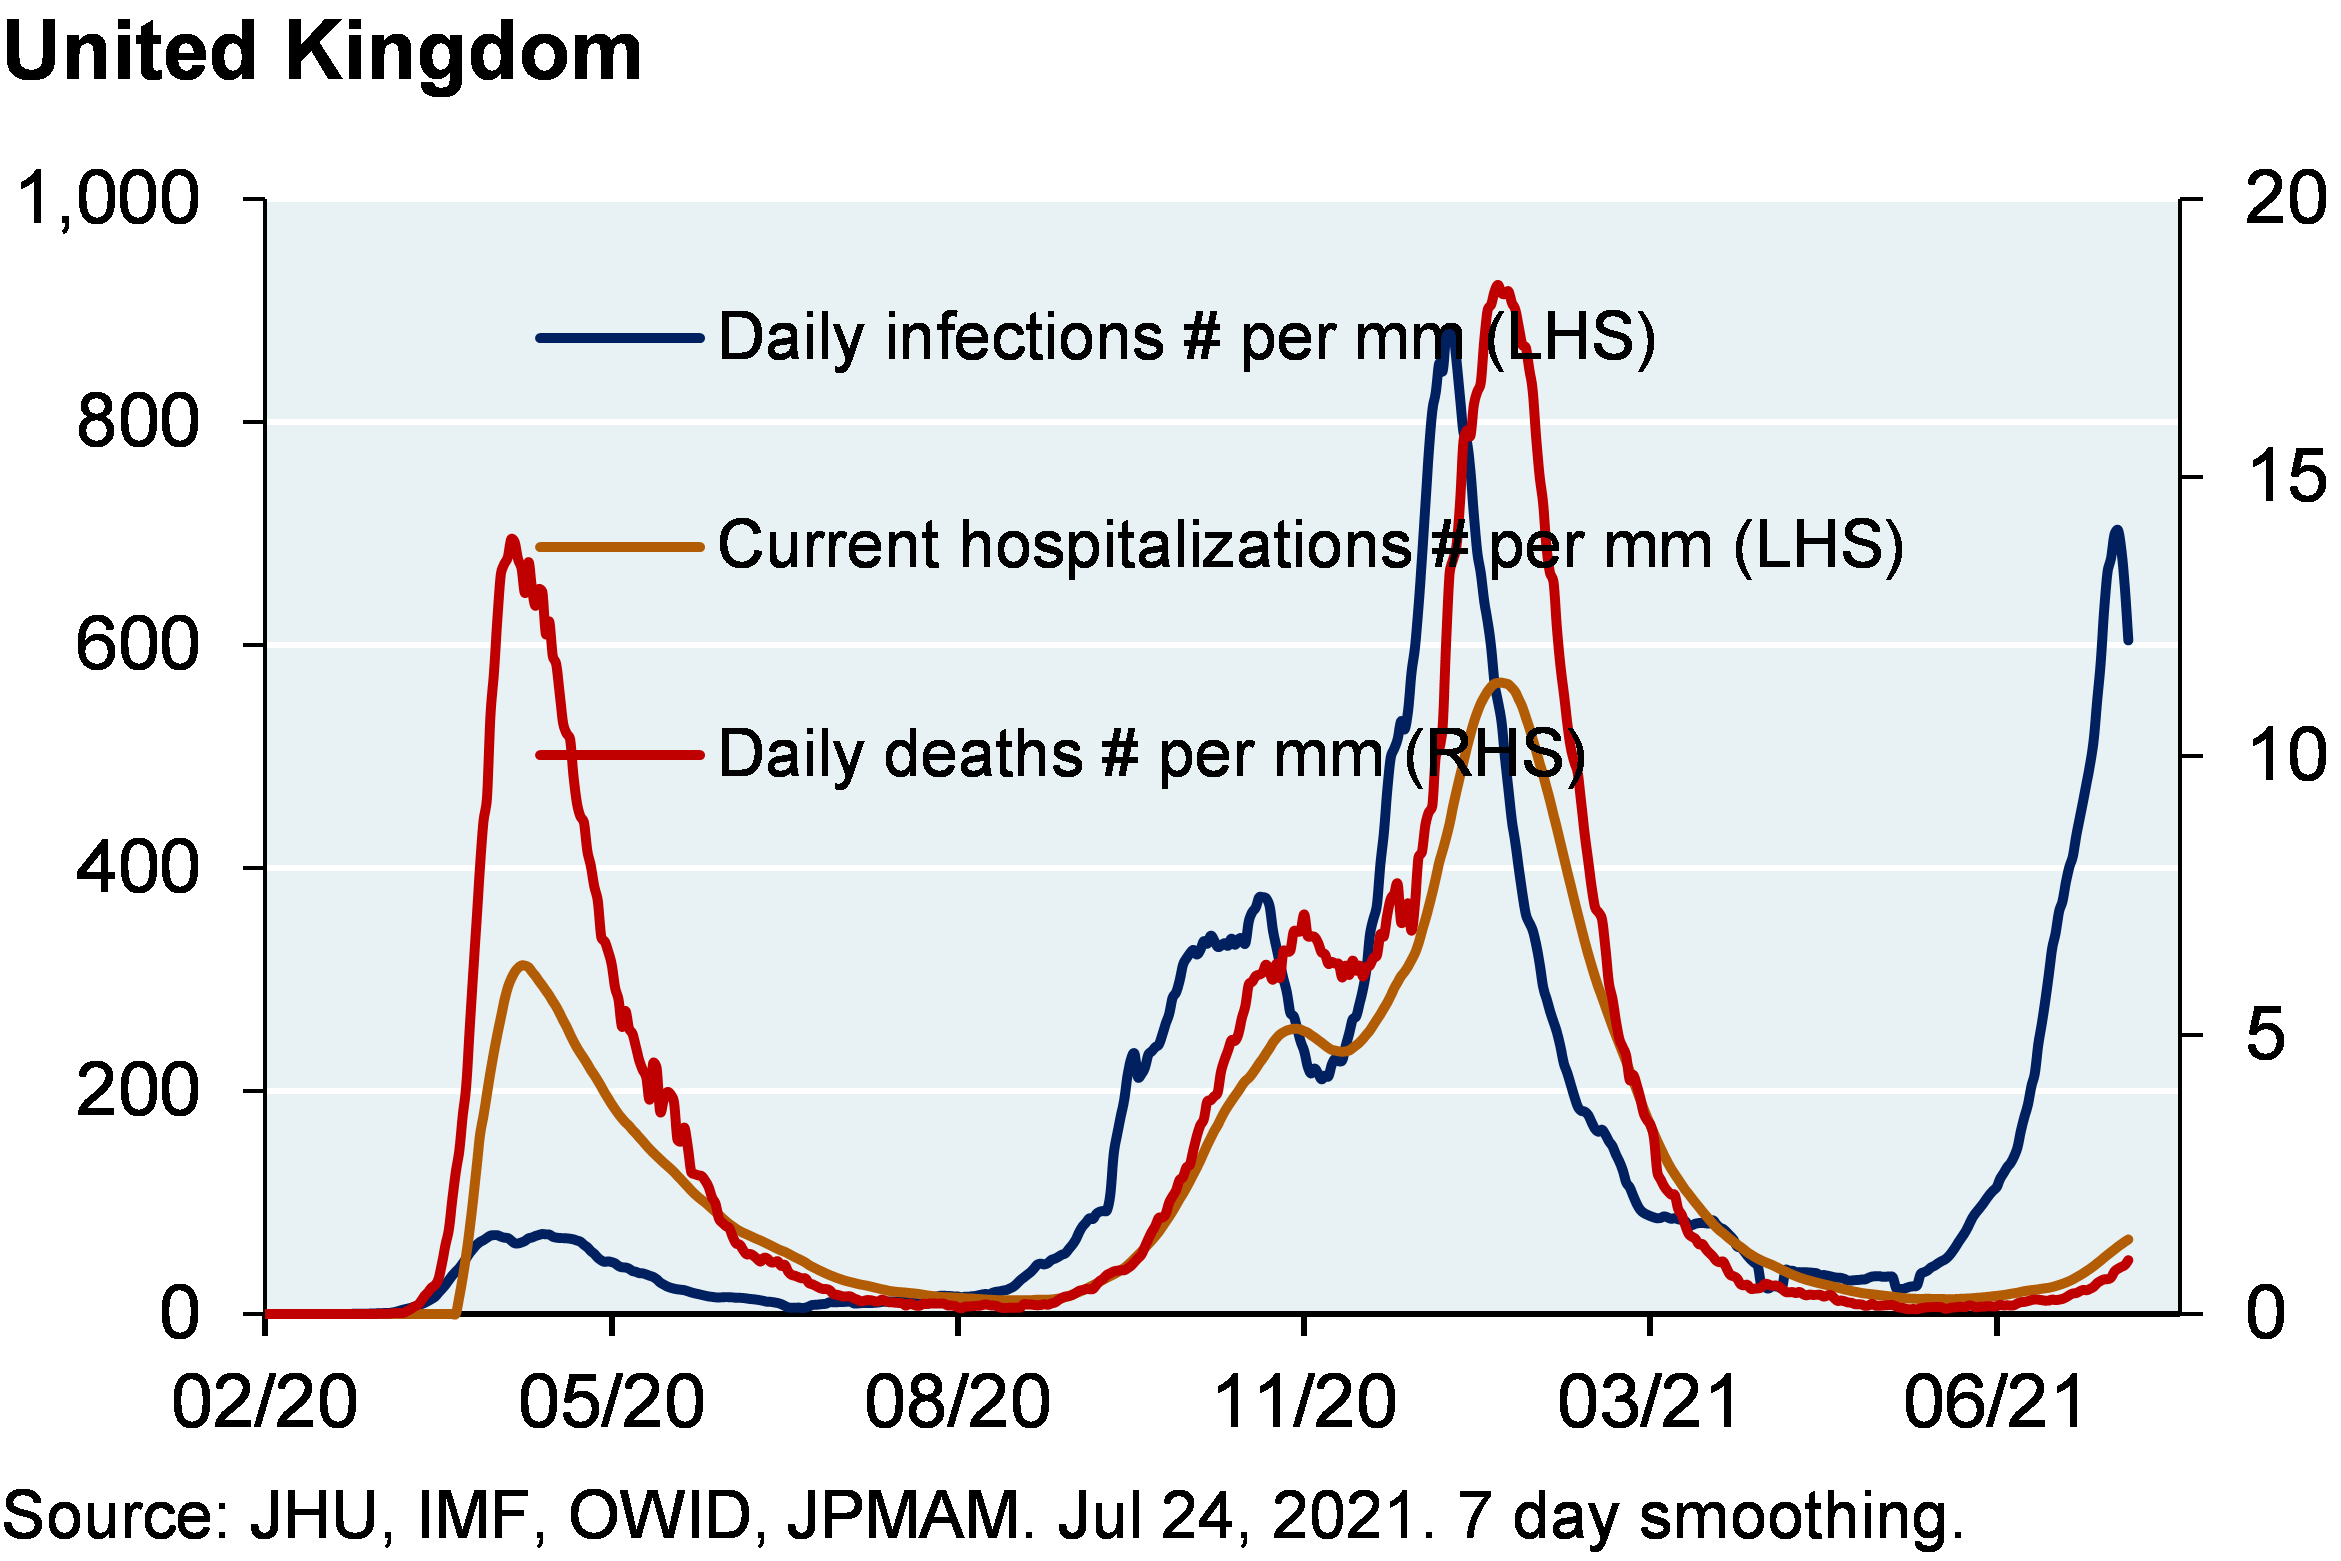 Line chart shows daily infections per million, current hospitalizations per million and daily deaths per million for the United Kingdom since February 2020. Chart shows that infections per million have spiked to a most recent value of around 700 infections per million while hospitalizations have remained at around 50 per million and deaths are around 1 per million. In previous infection spikes, deaths and hospitalizations increased relatively in line with infections.